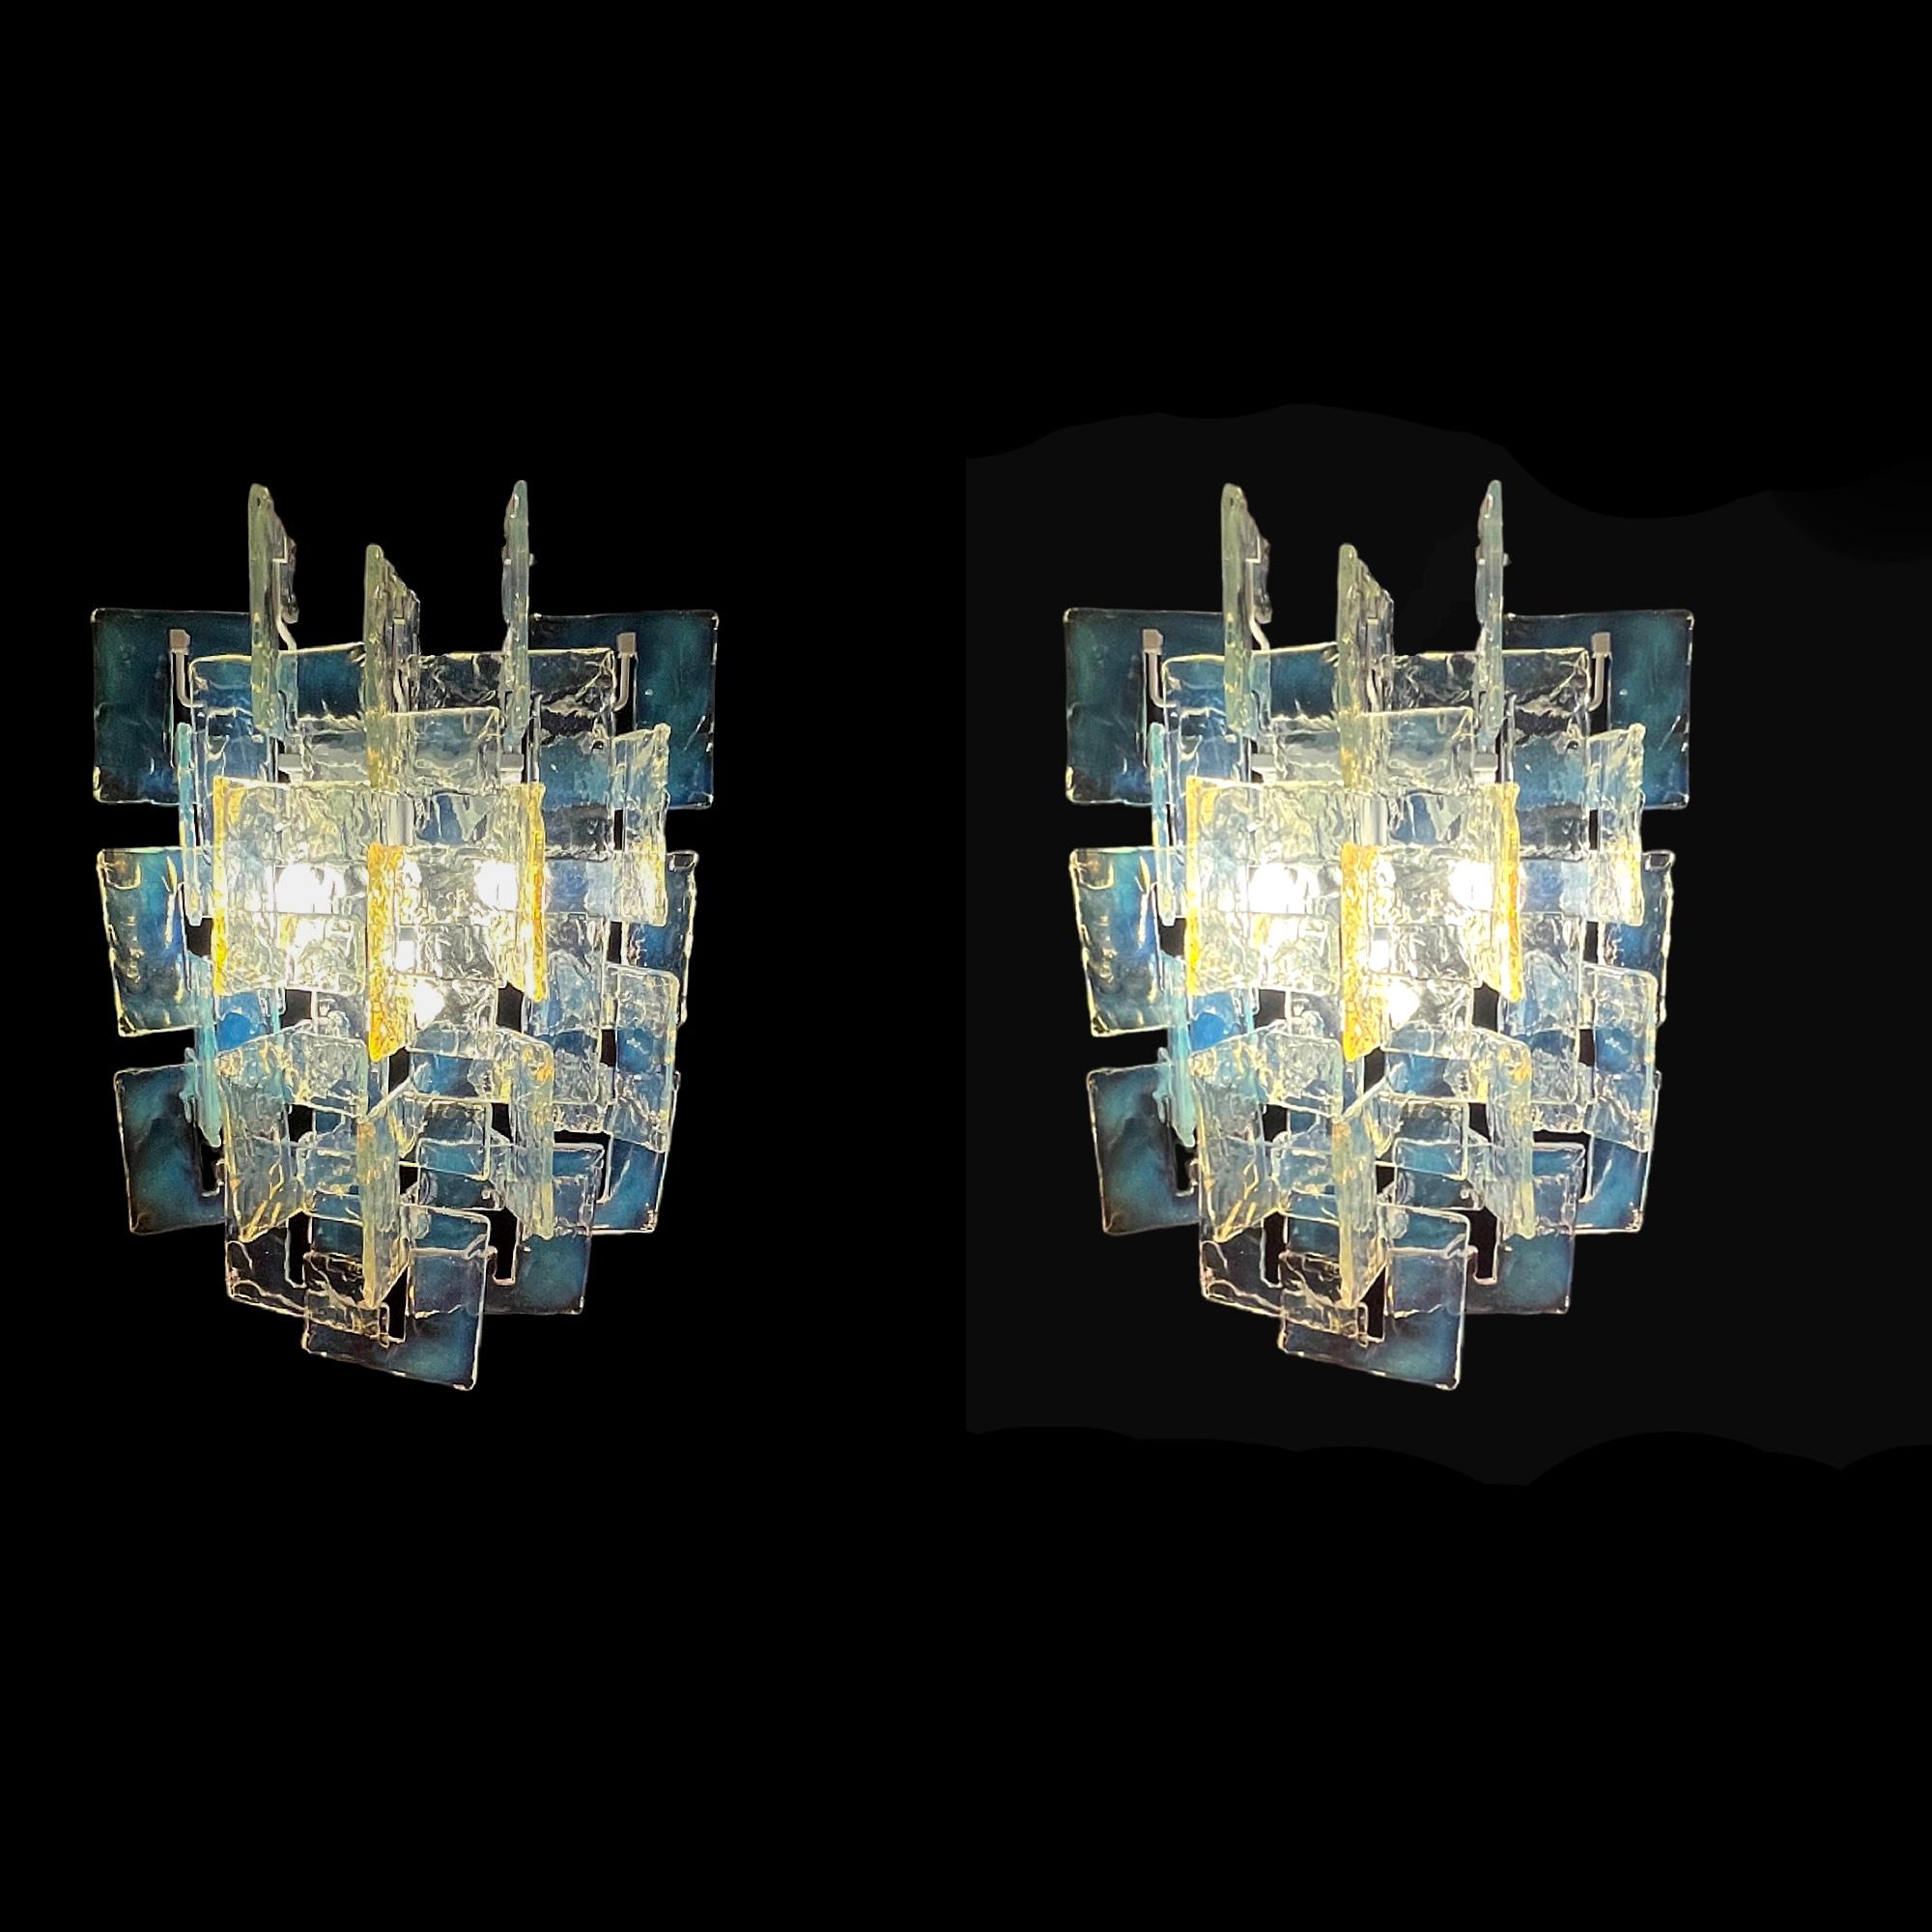 These stunning wall lights, designed by Carlo Nason for the Mazzega Vertical D´Arte , Murano Venezia in the 1960s, are true masterpieces of Murano glass. They consist of 56 hand-blown glass pieces in the characteristic 